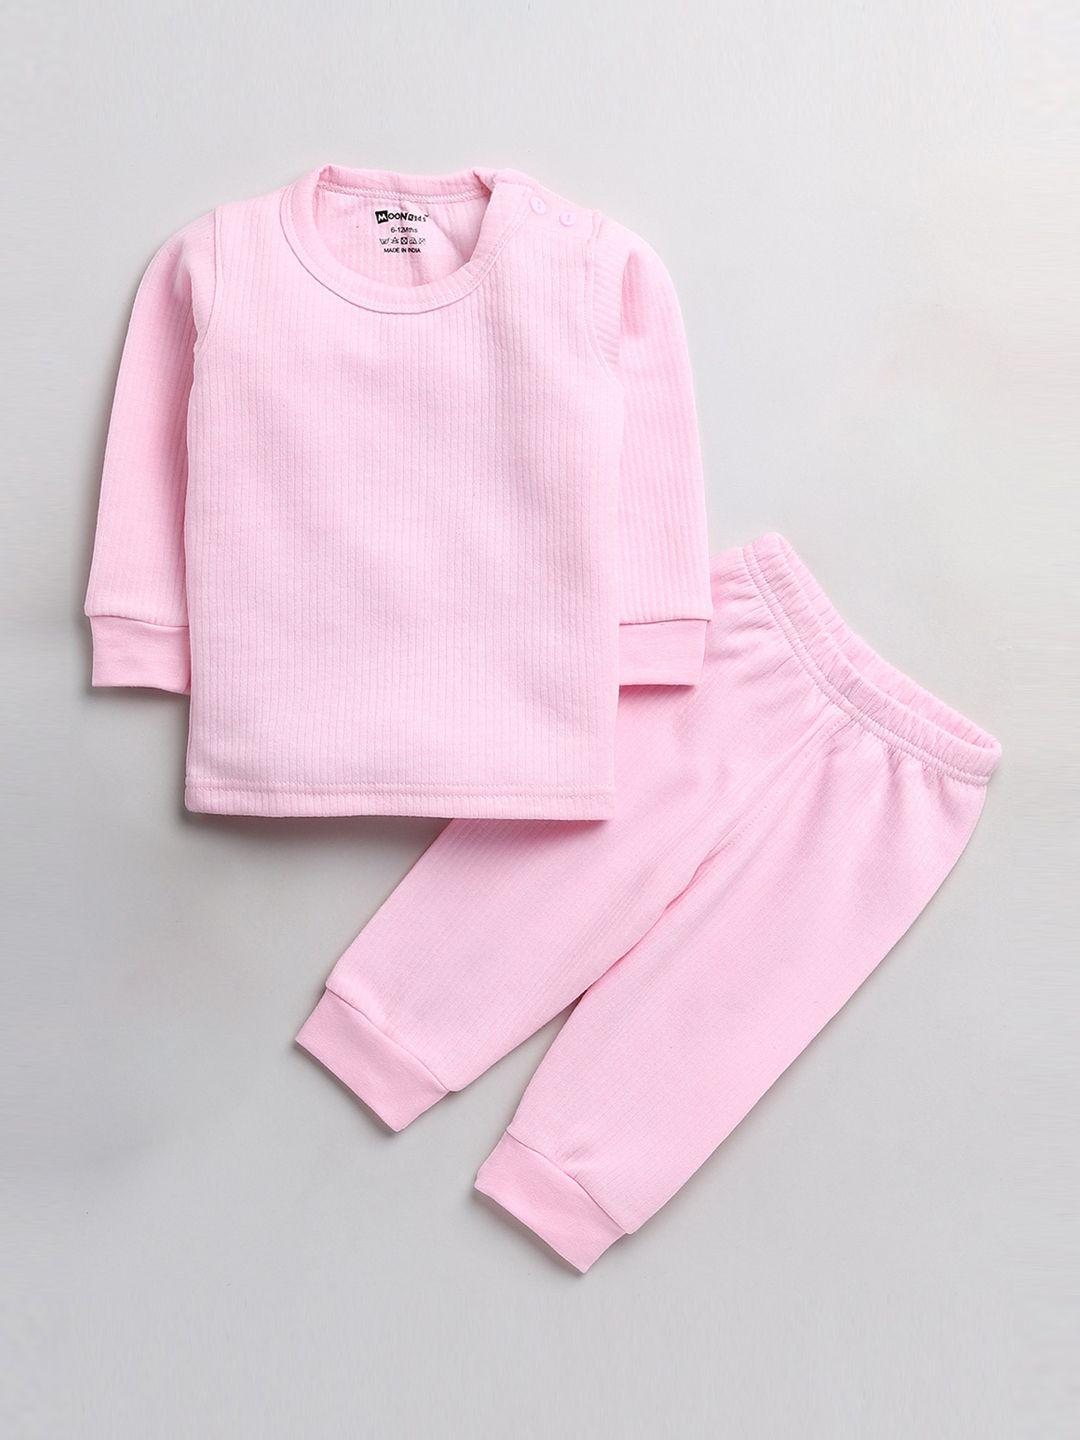 moonkids-boys-pink-solid-cotton-thermal-set